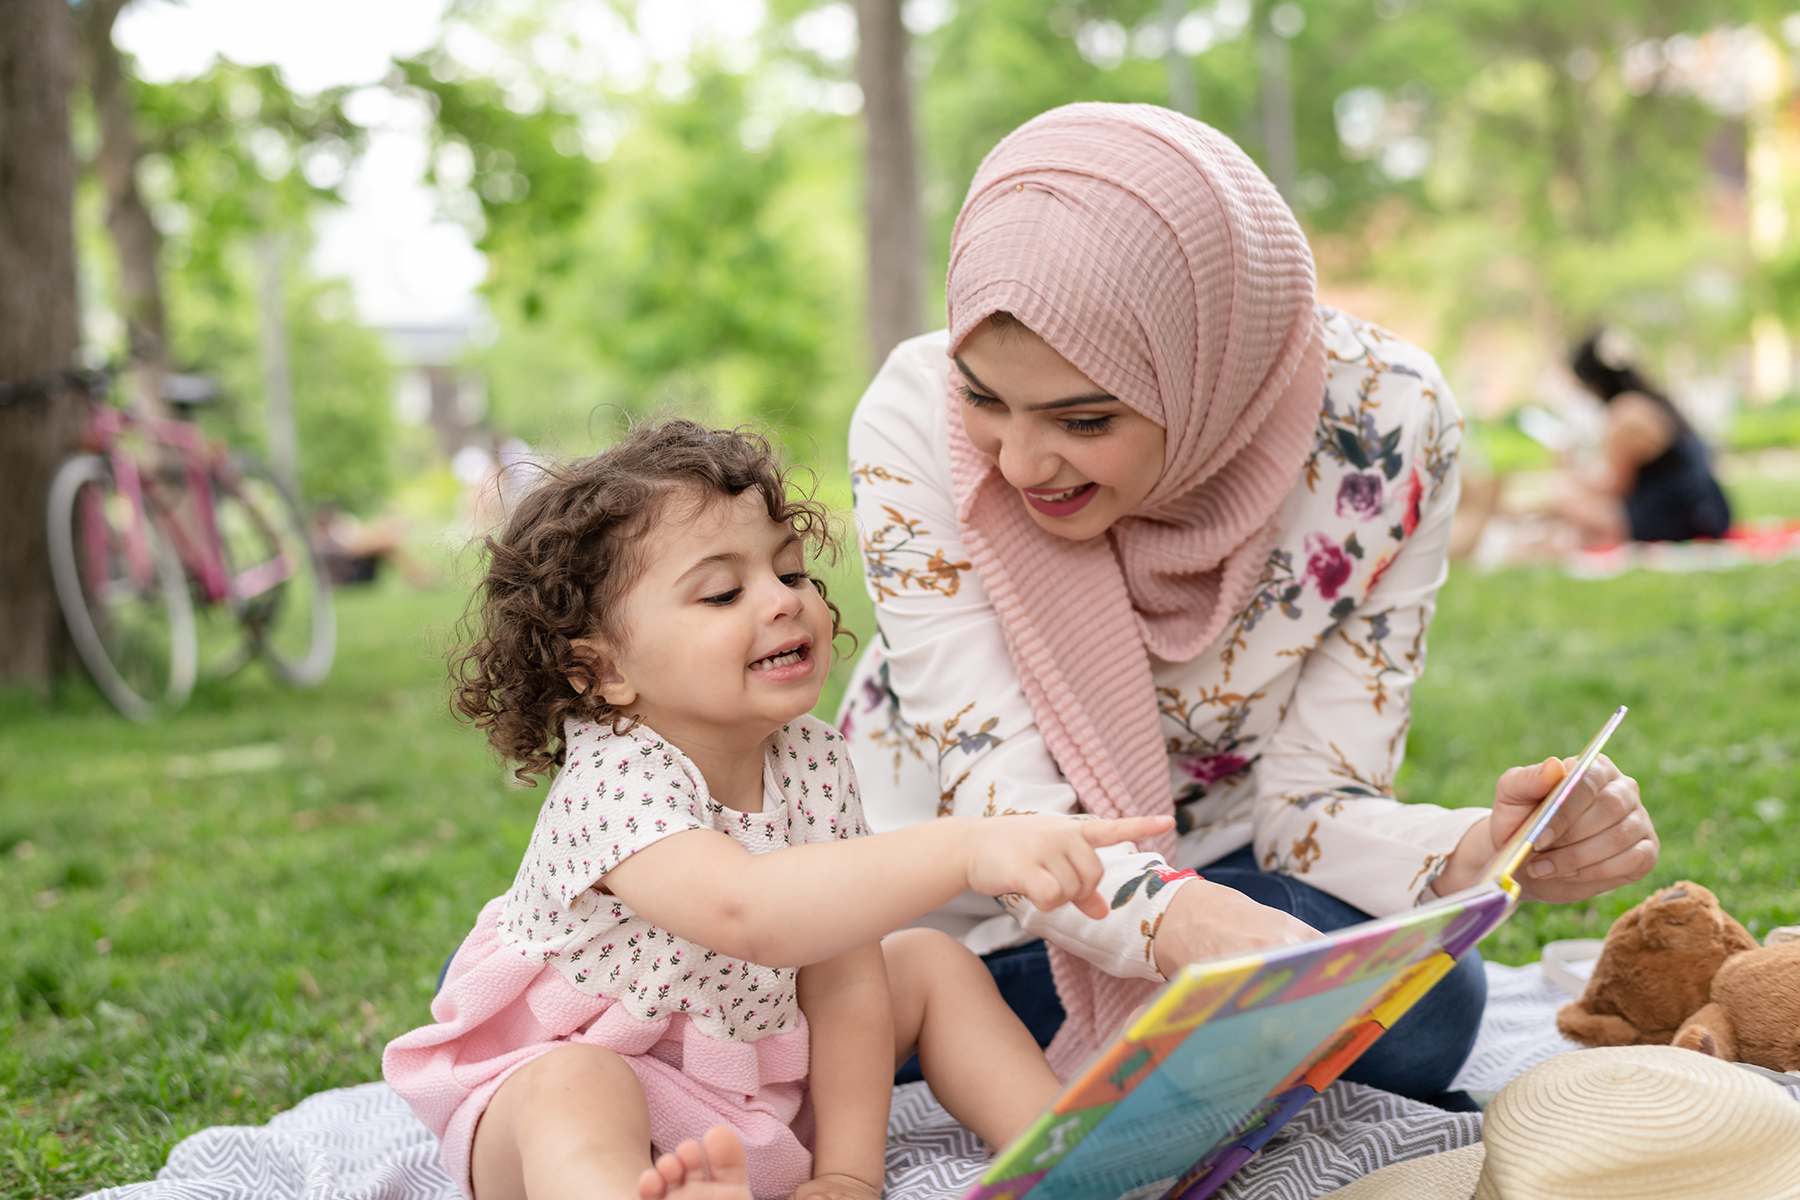 A photo of a mother sitting in a park with her young child. They are reading and interacting with a book